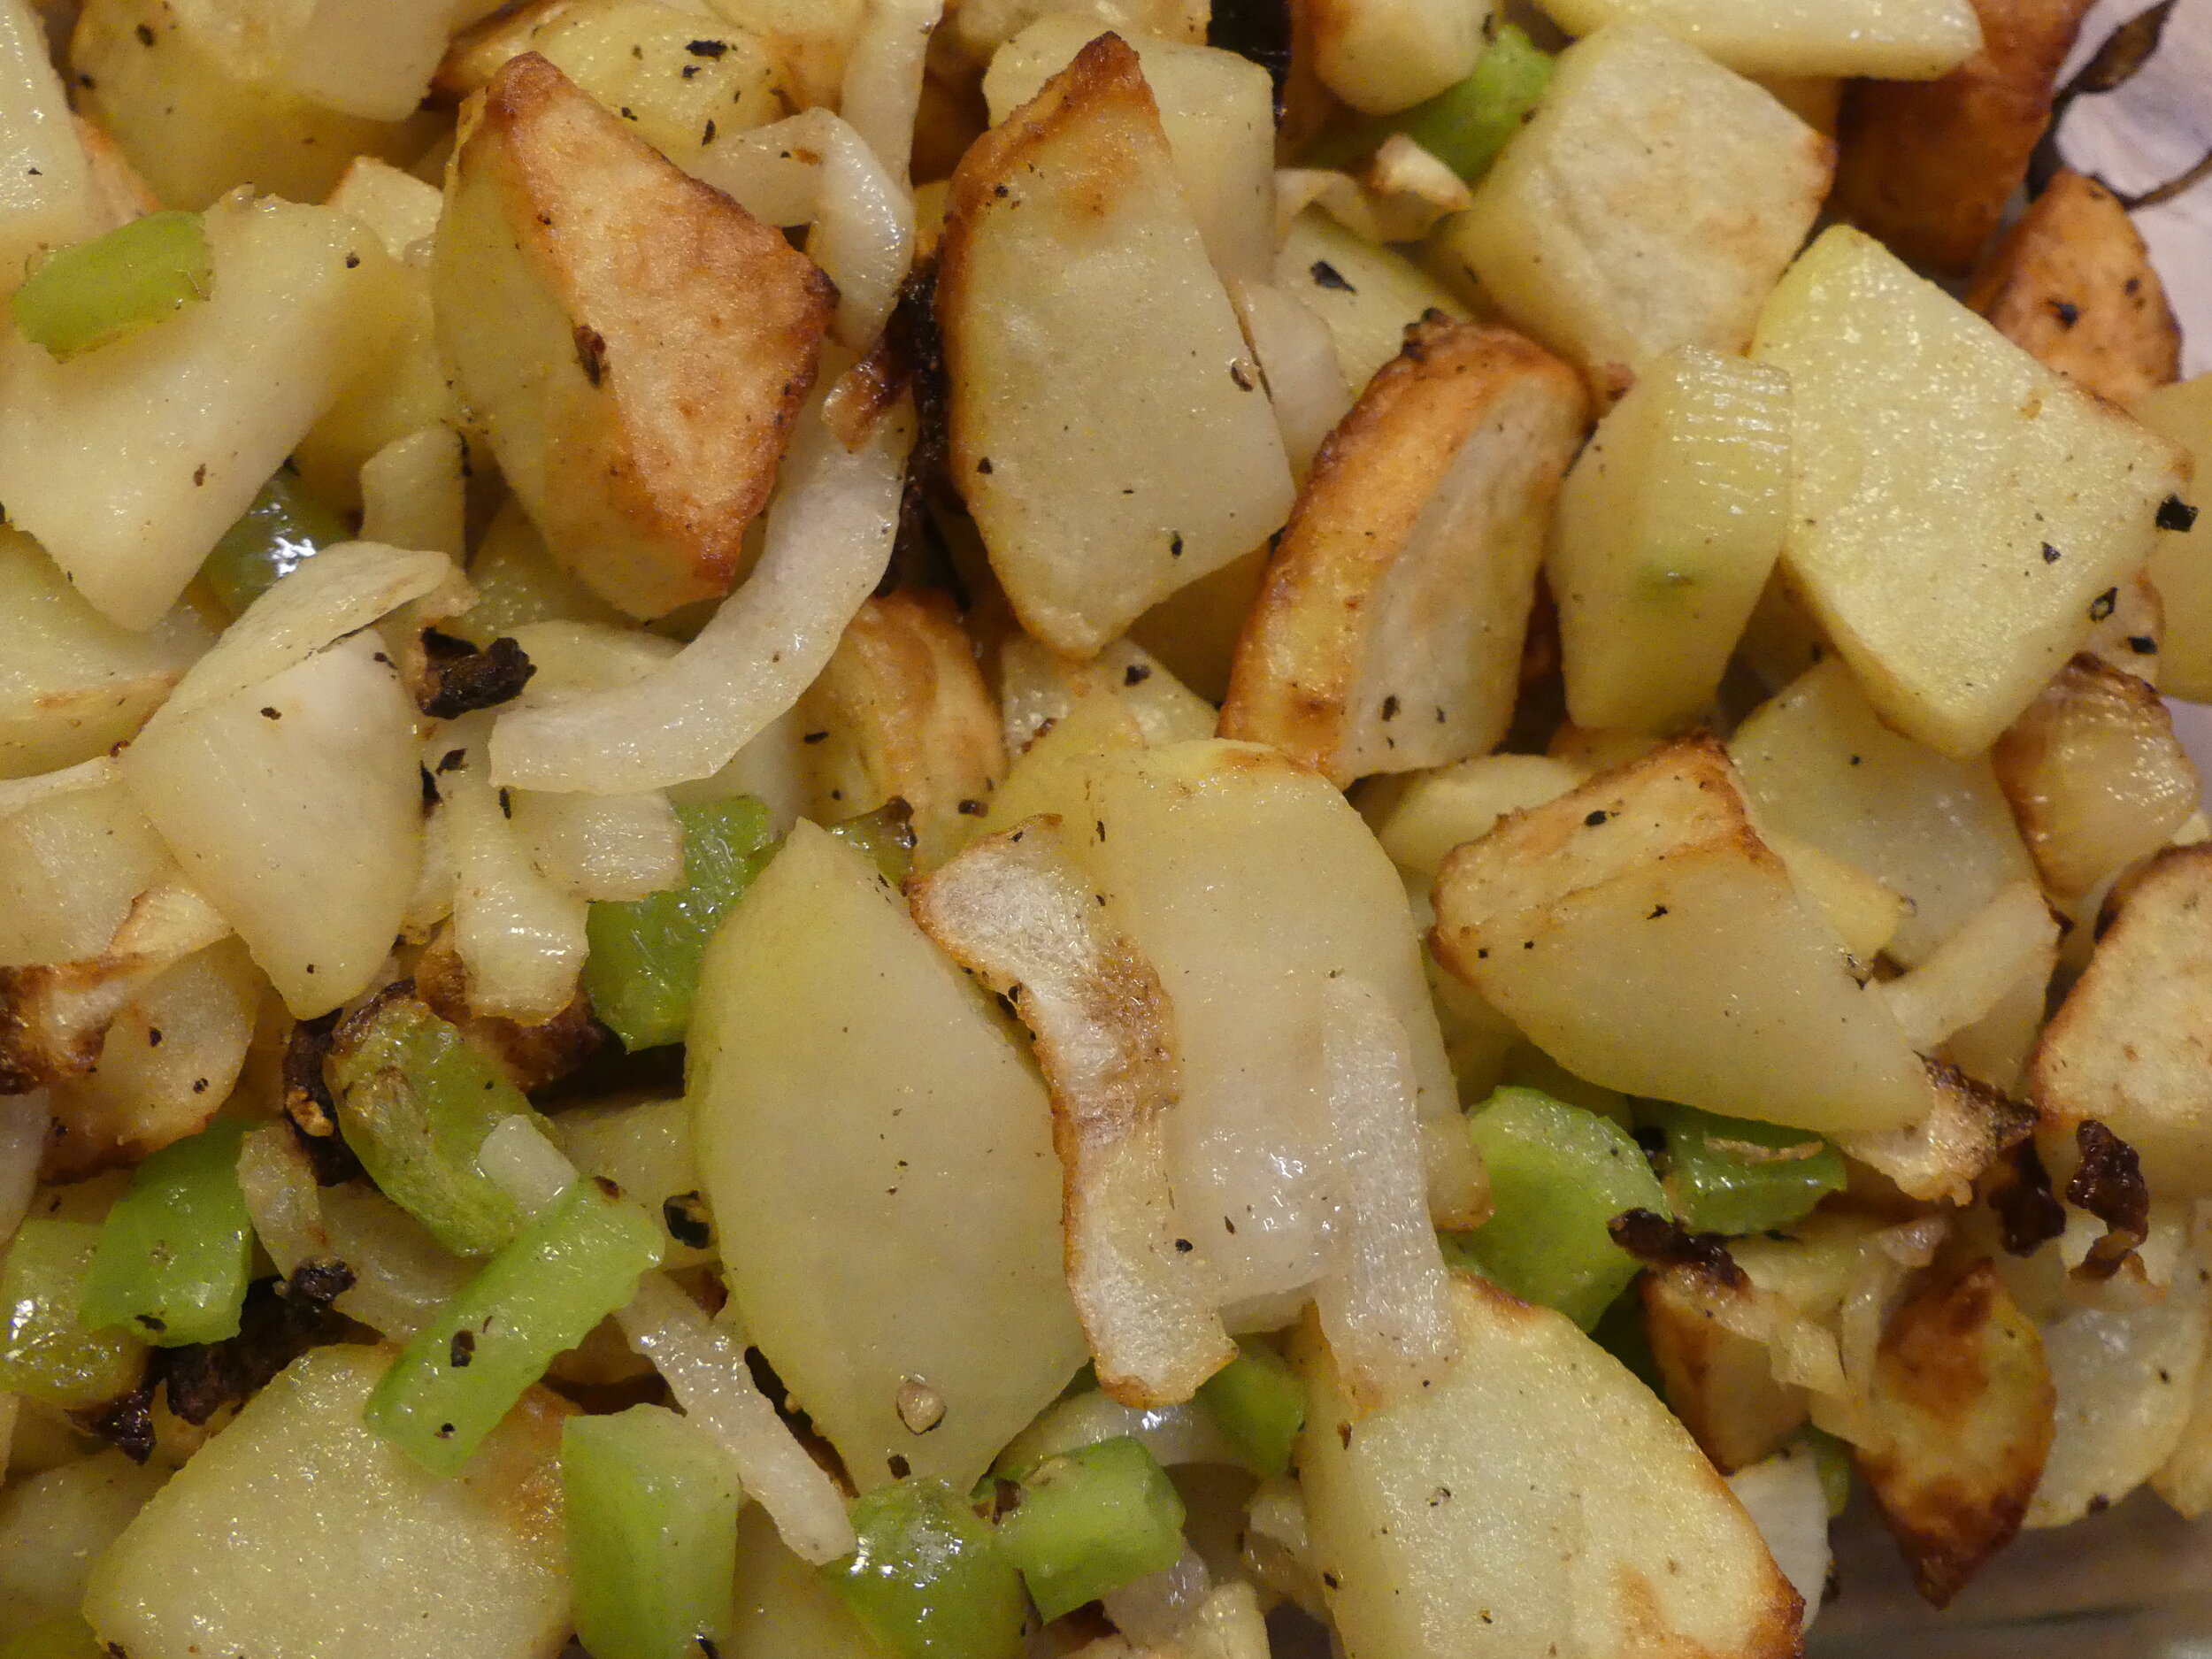 Home Fries in the Air Fryer